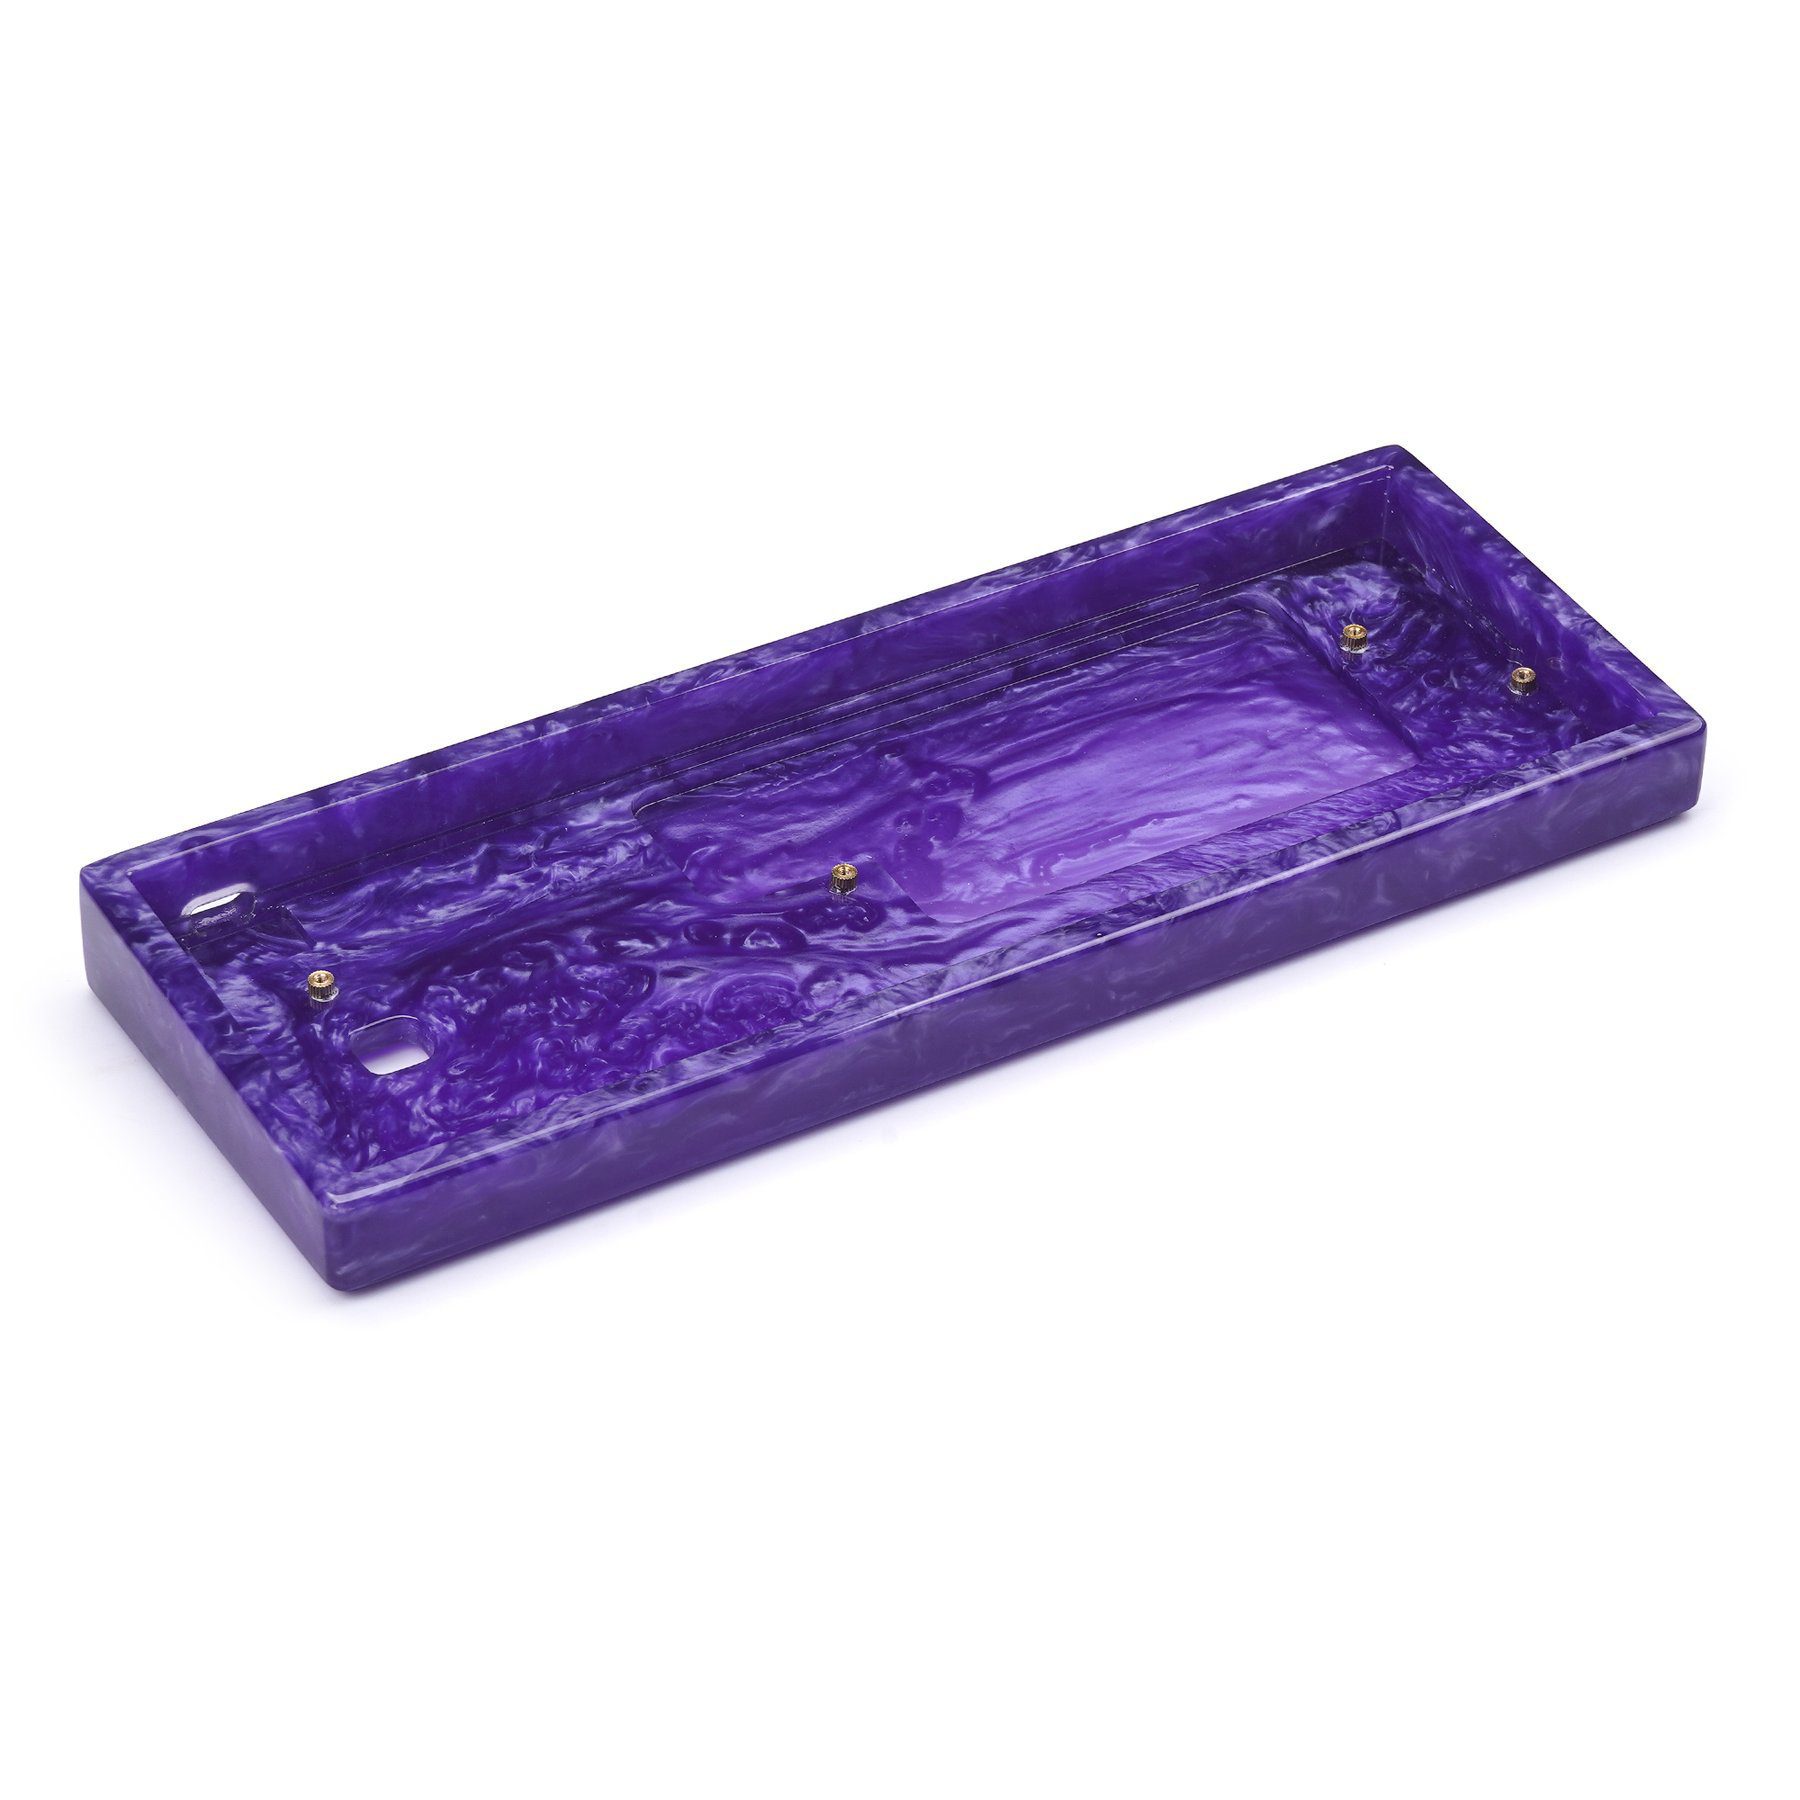 Alopow 60% Resin Case for Customized Mechanical Keyboard